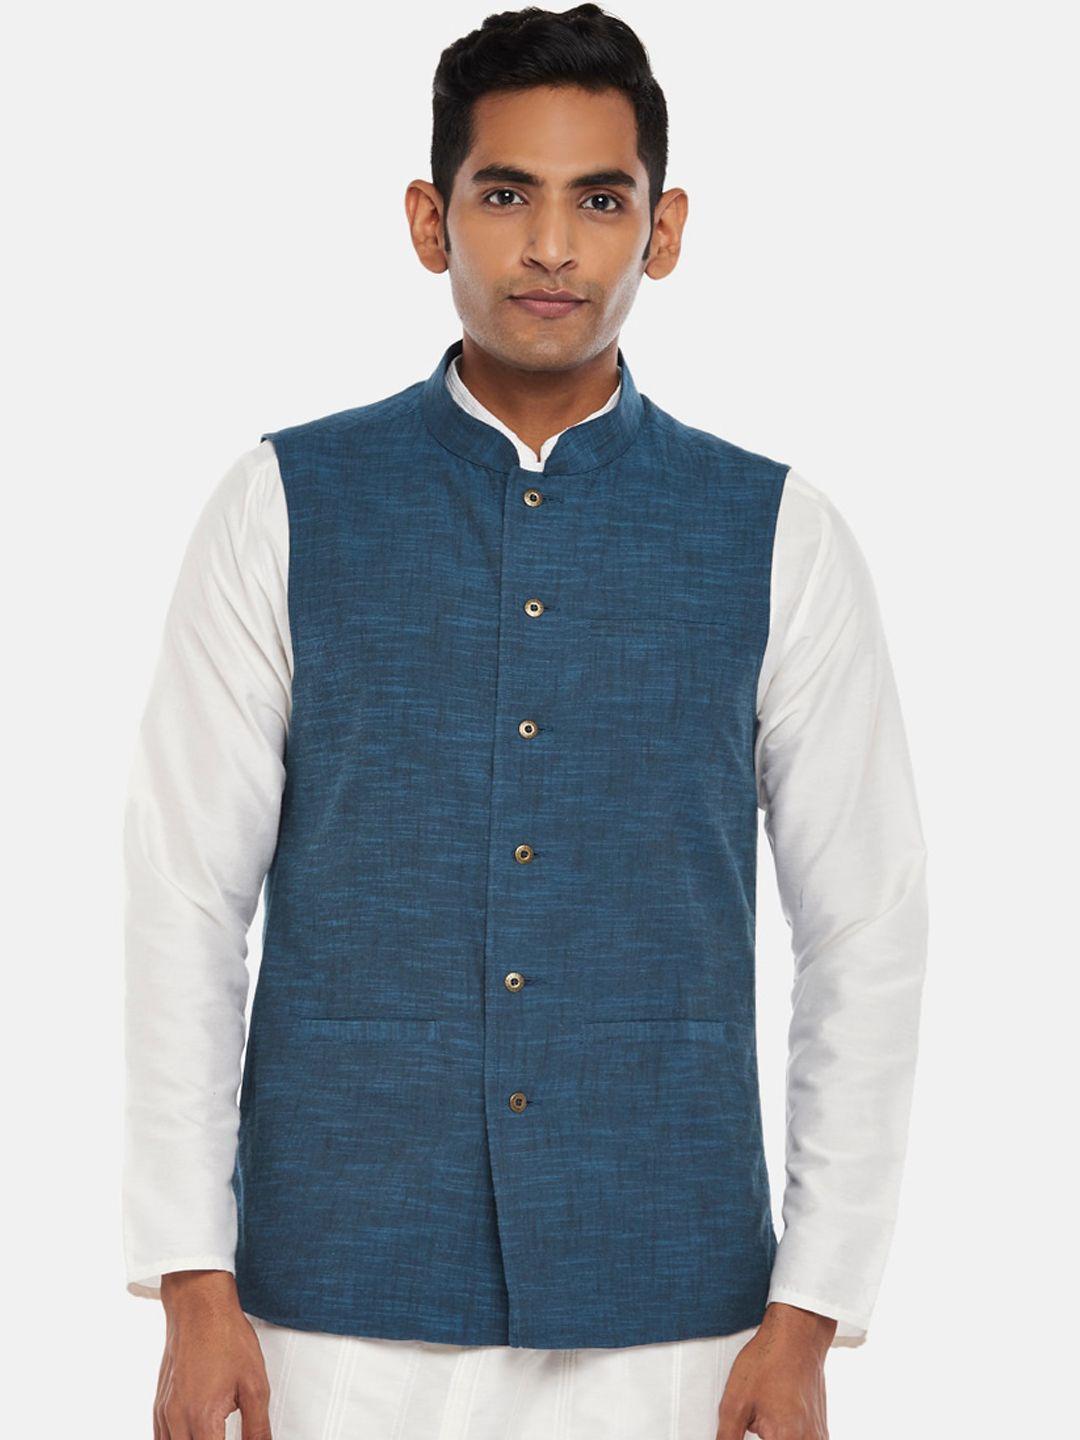 indus route by pantaloons men navy blue solid woven waistcoat